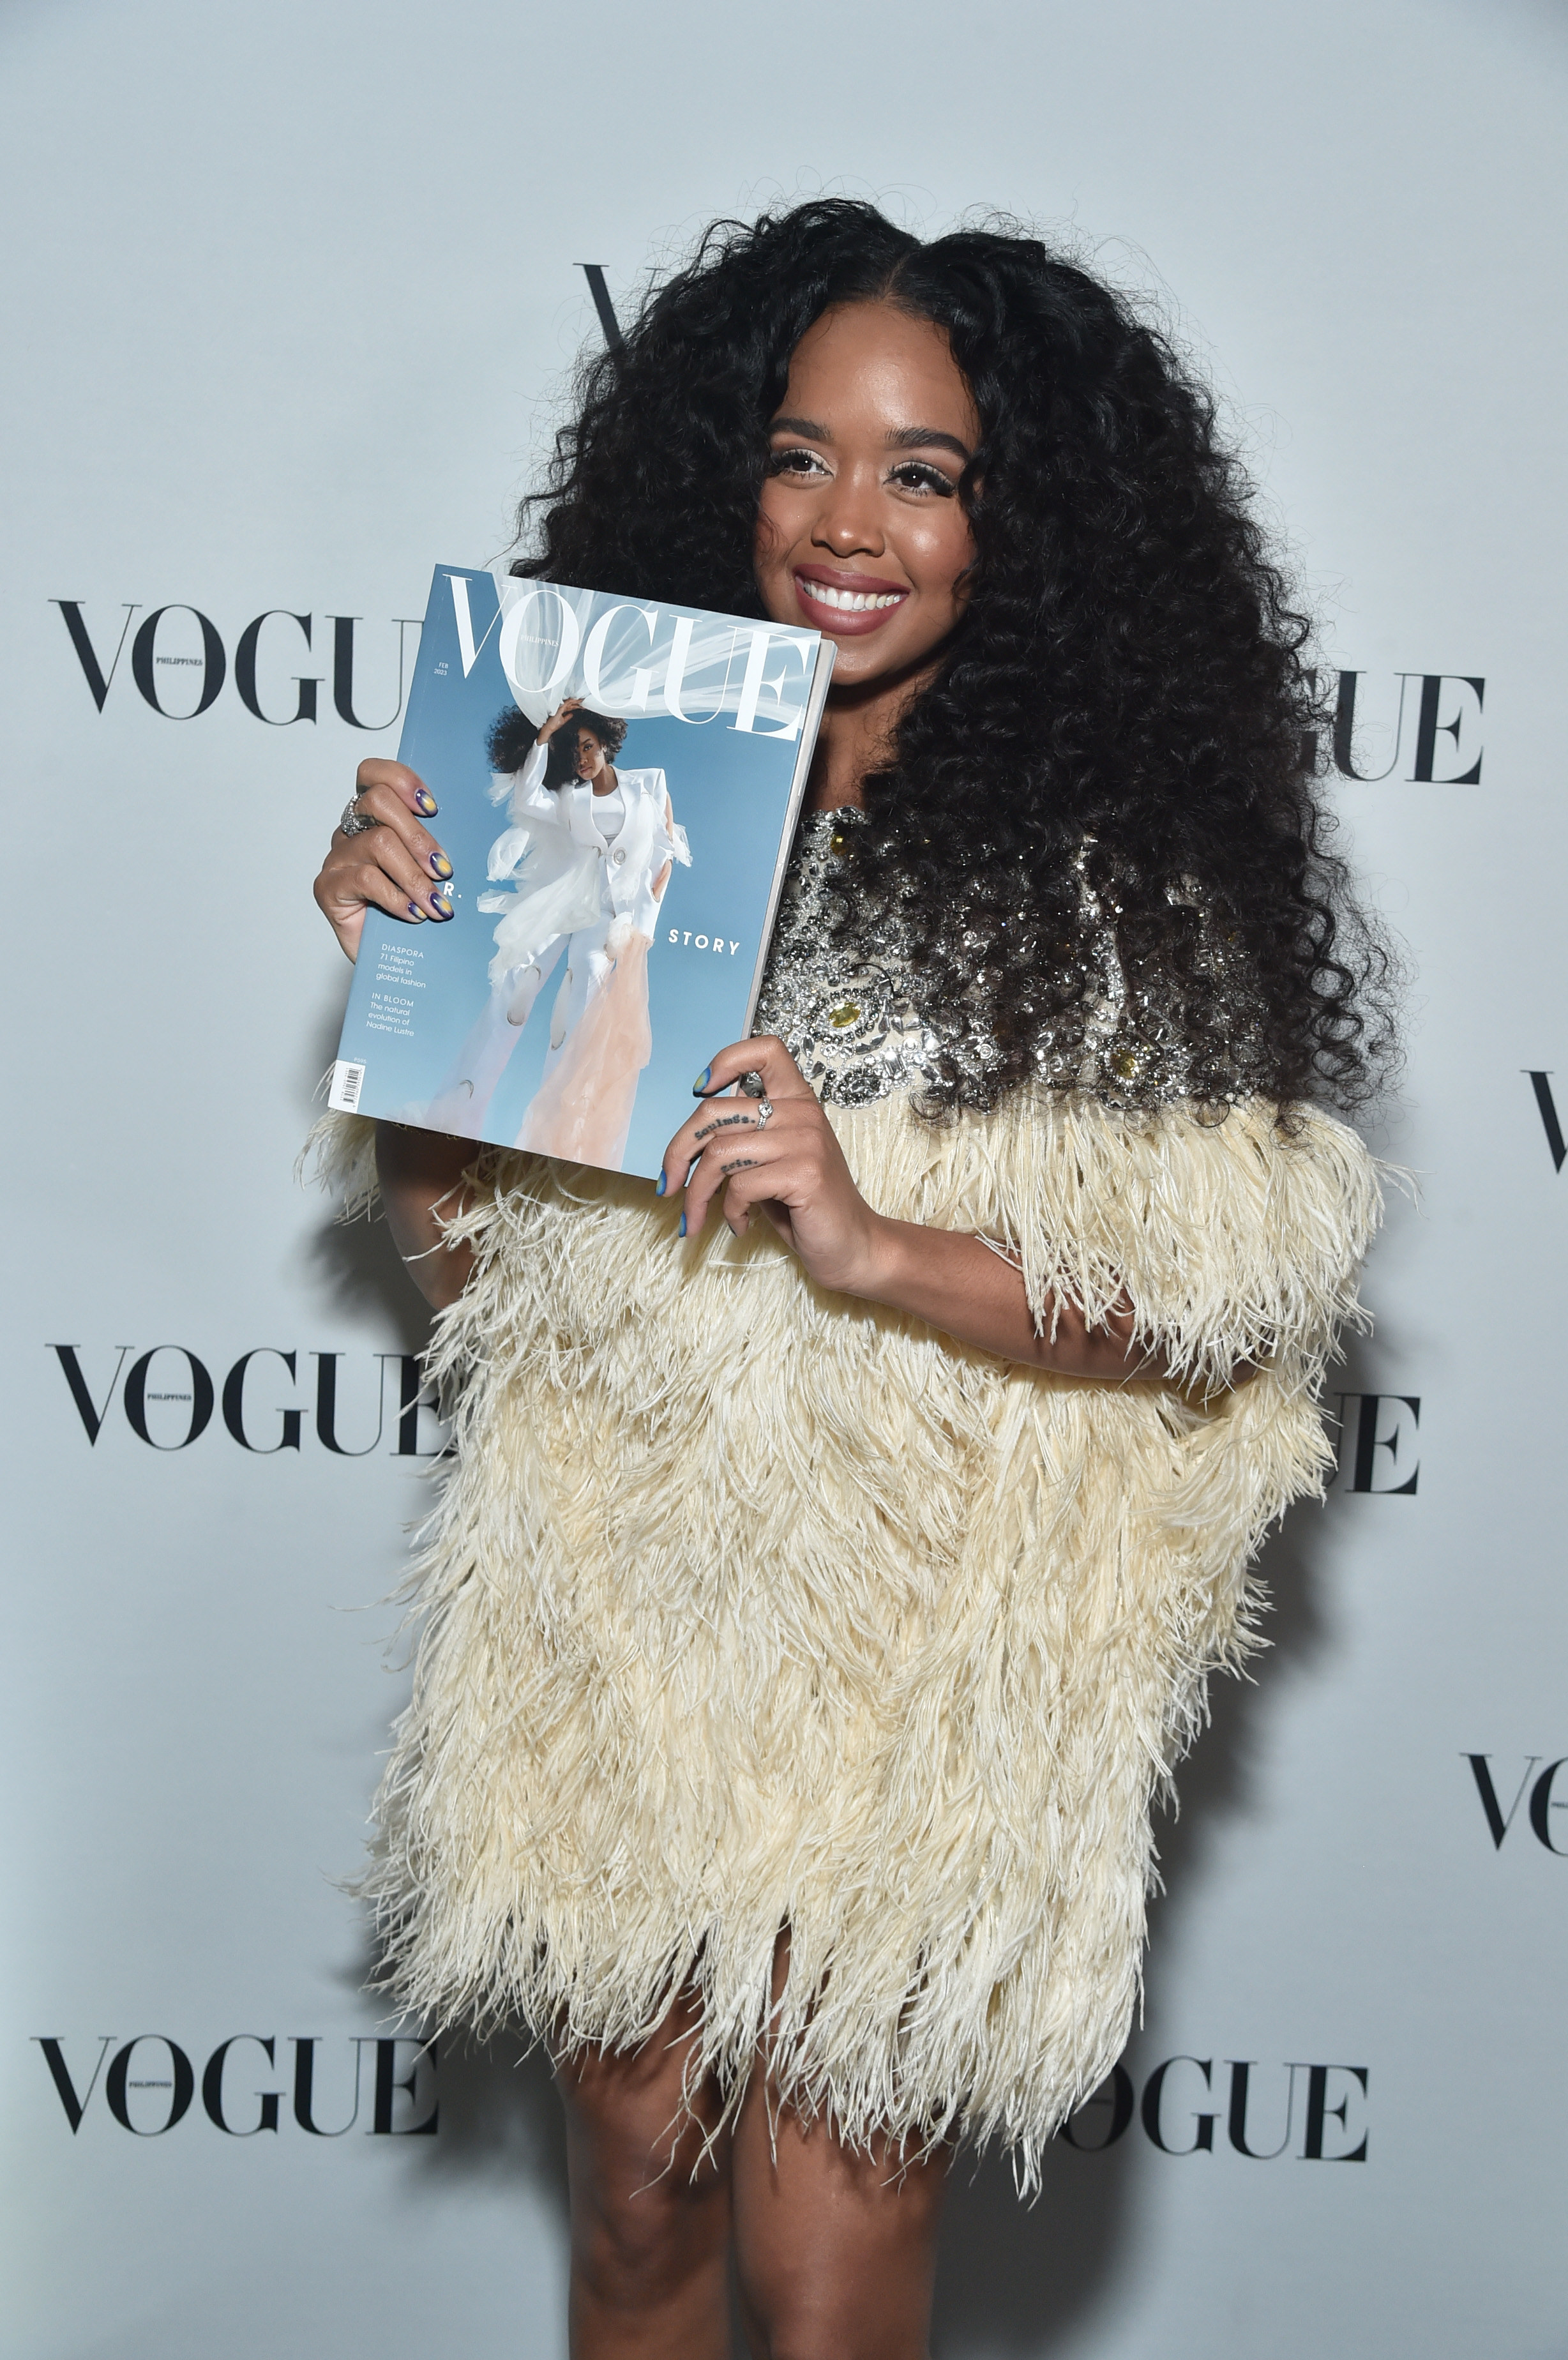 H.E.R. at the release party for her cover for Vogue Philippines holding up a copy of the magazine